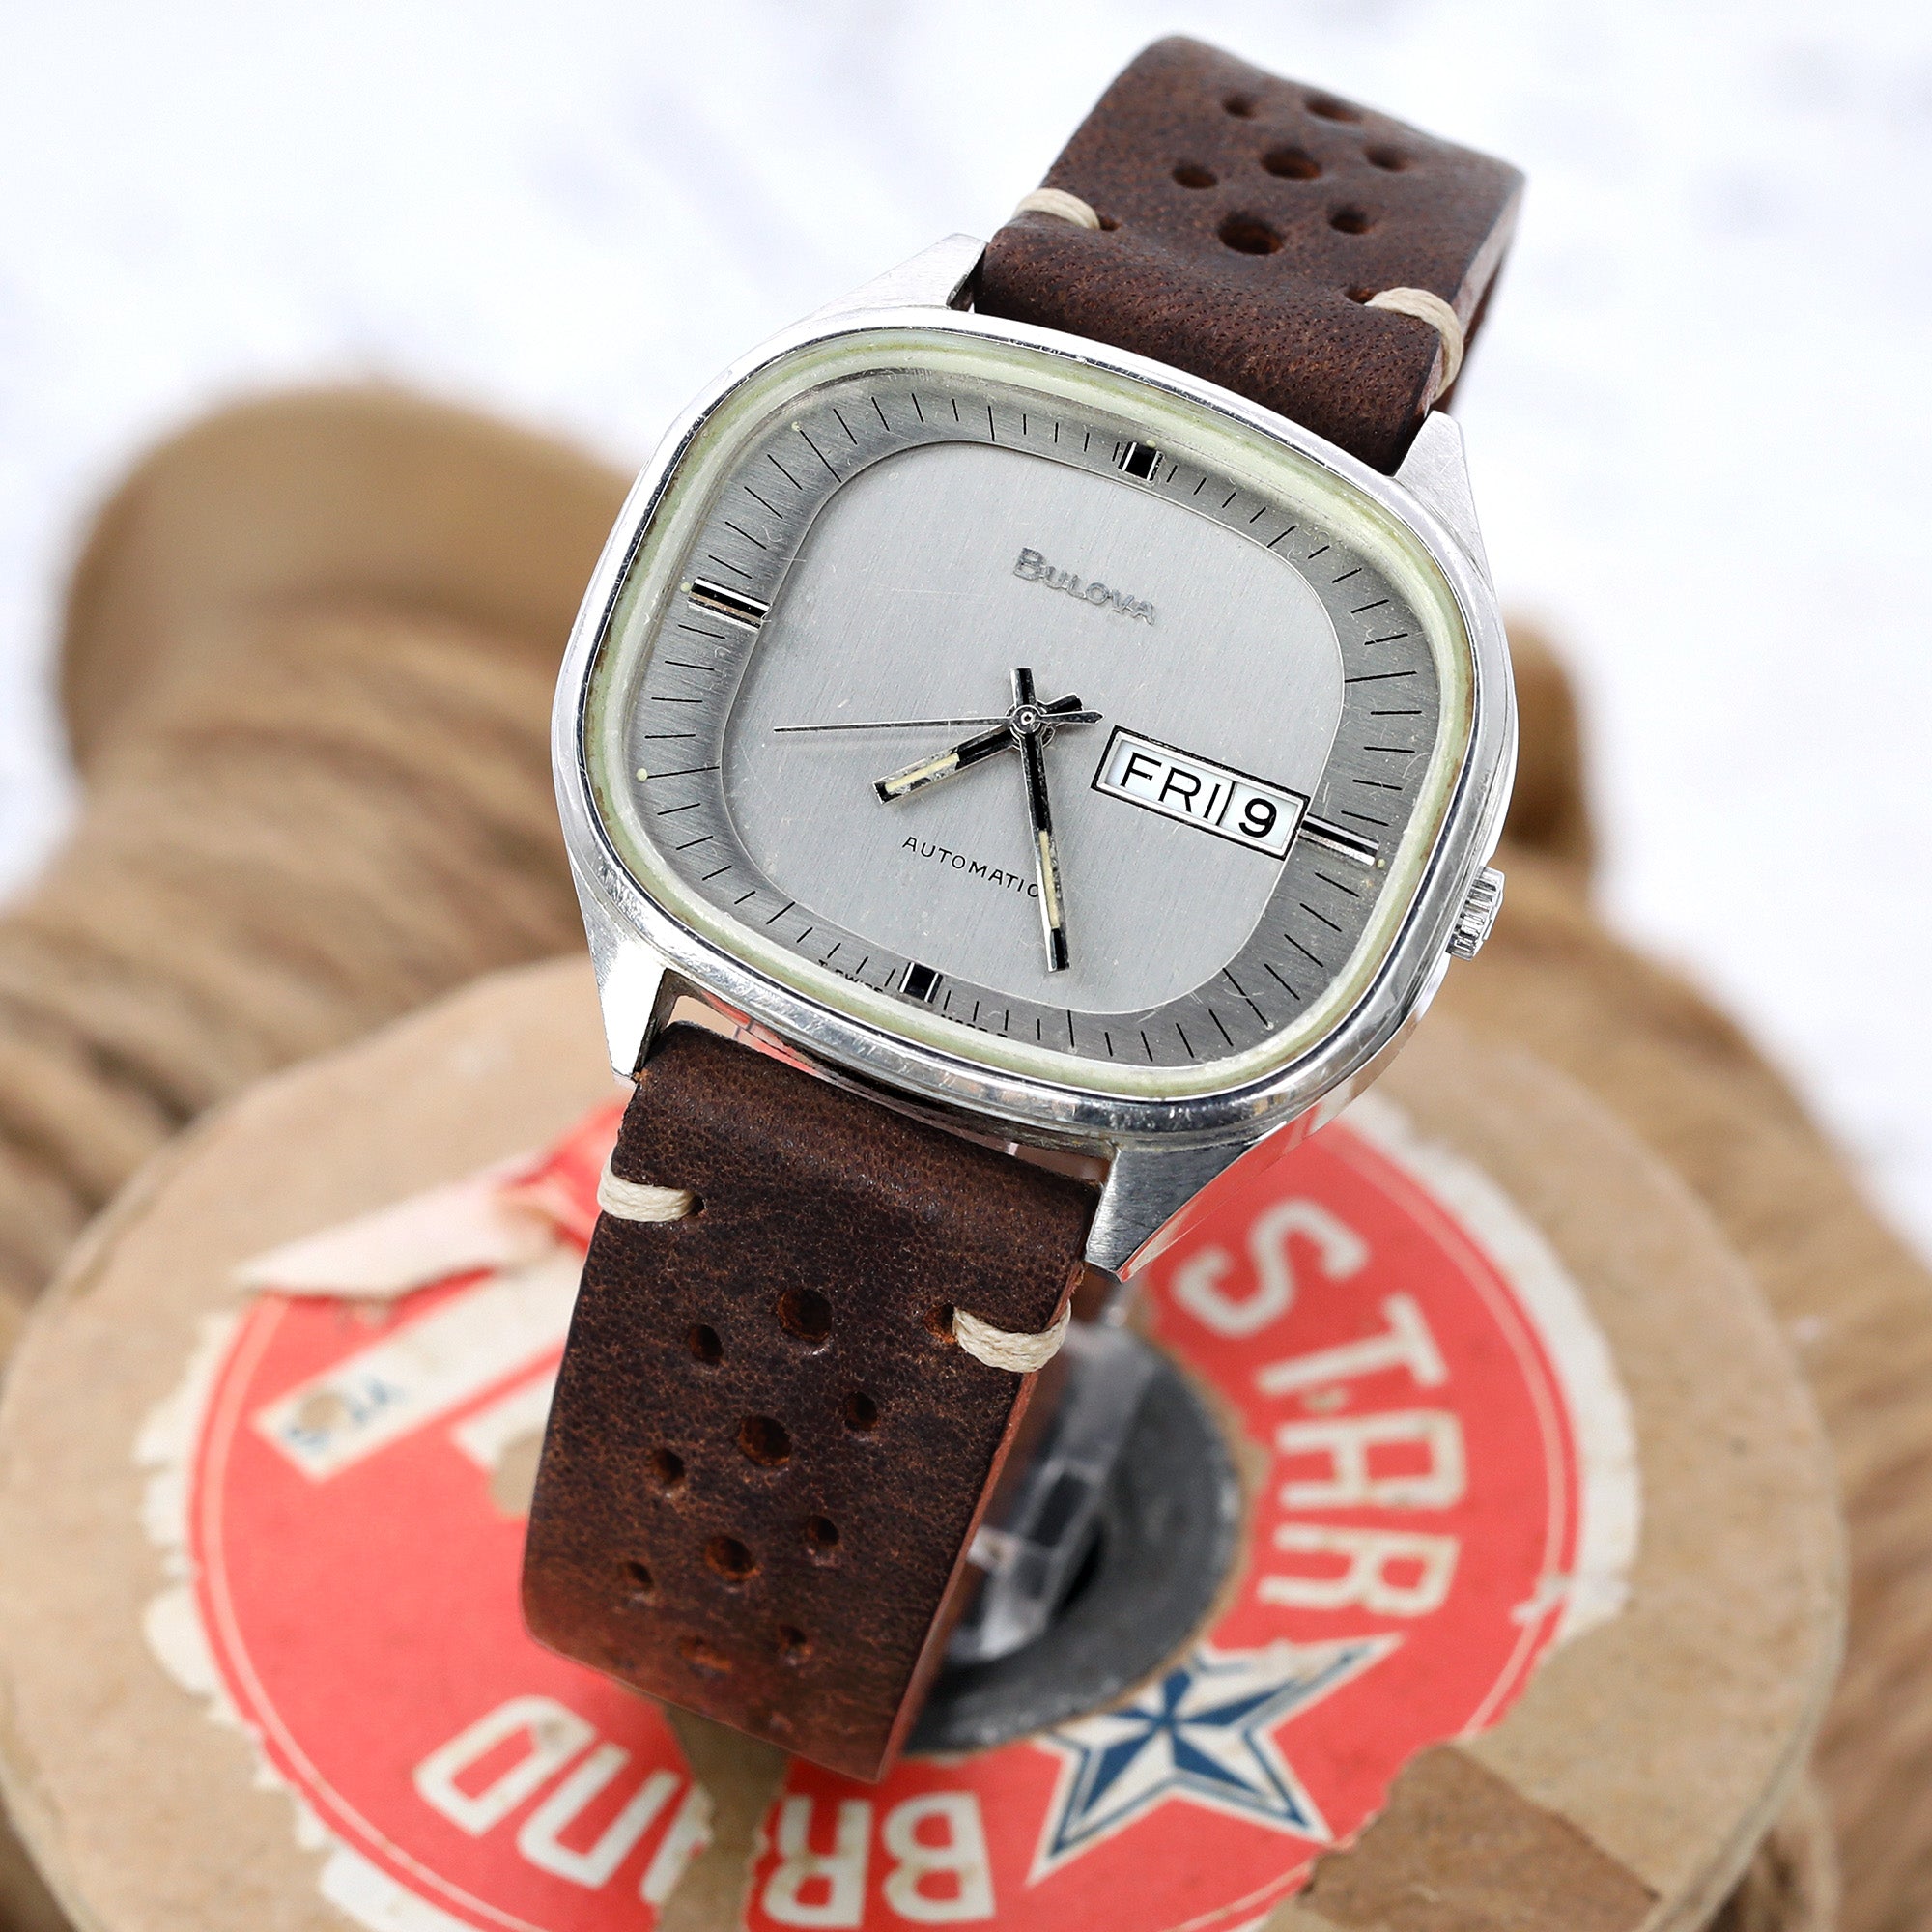 Watch Bands | Watch Bands Making You Fall In Love With Your Watches All Over Again